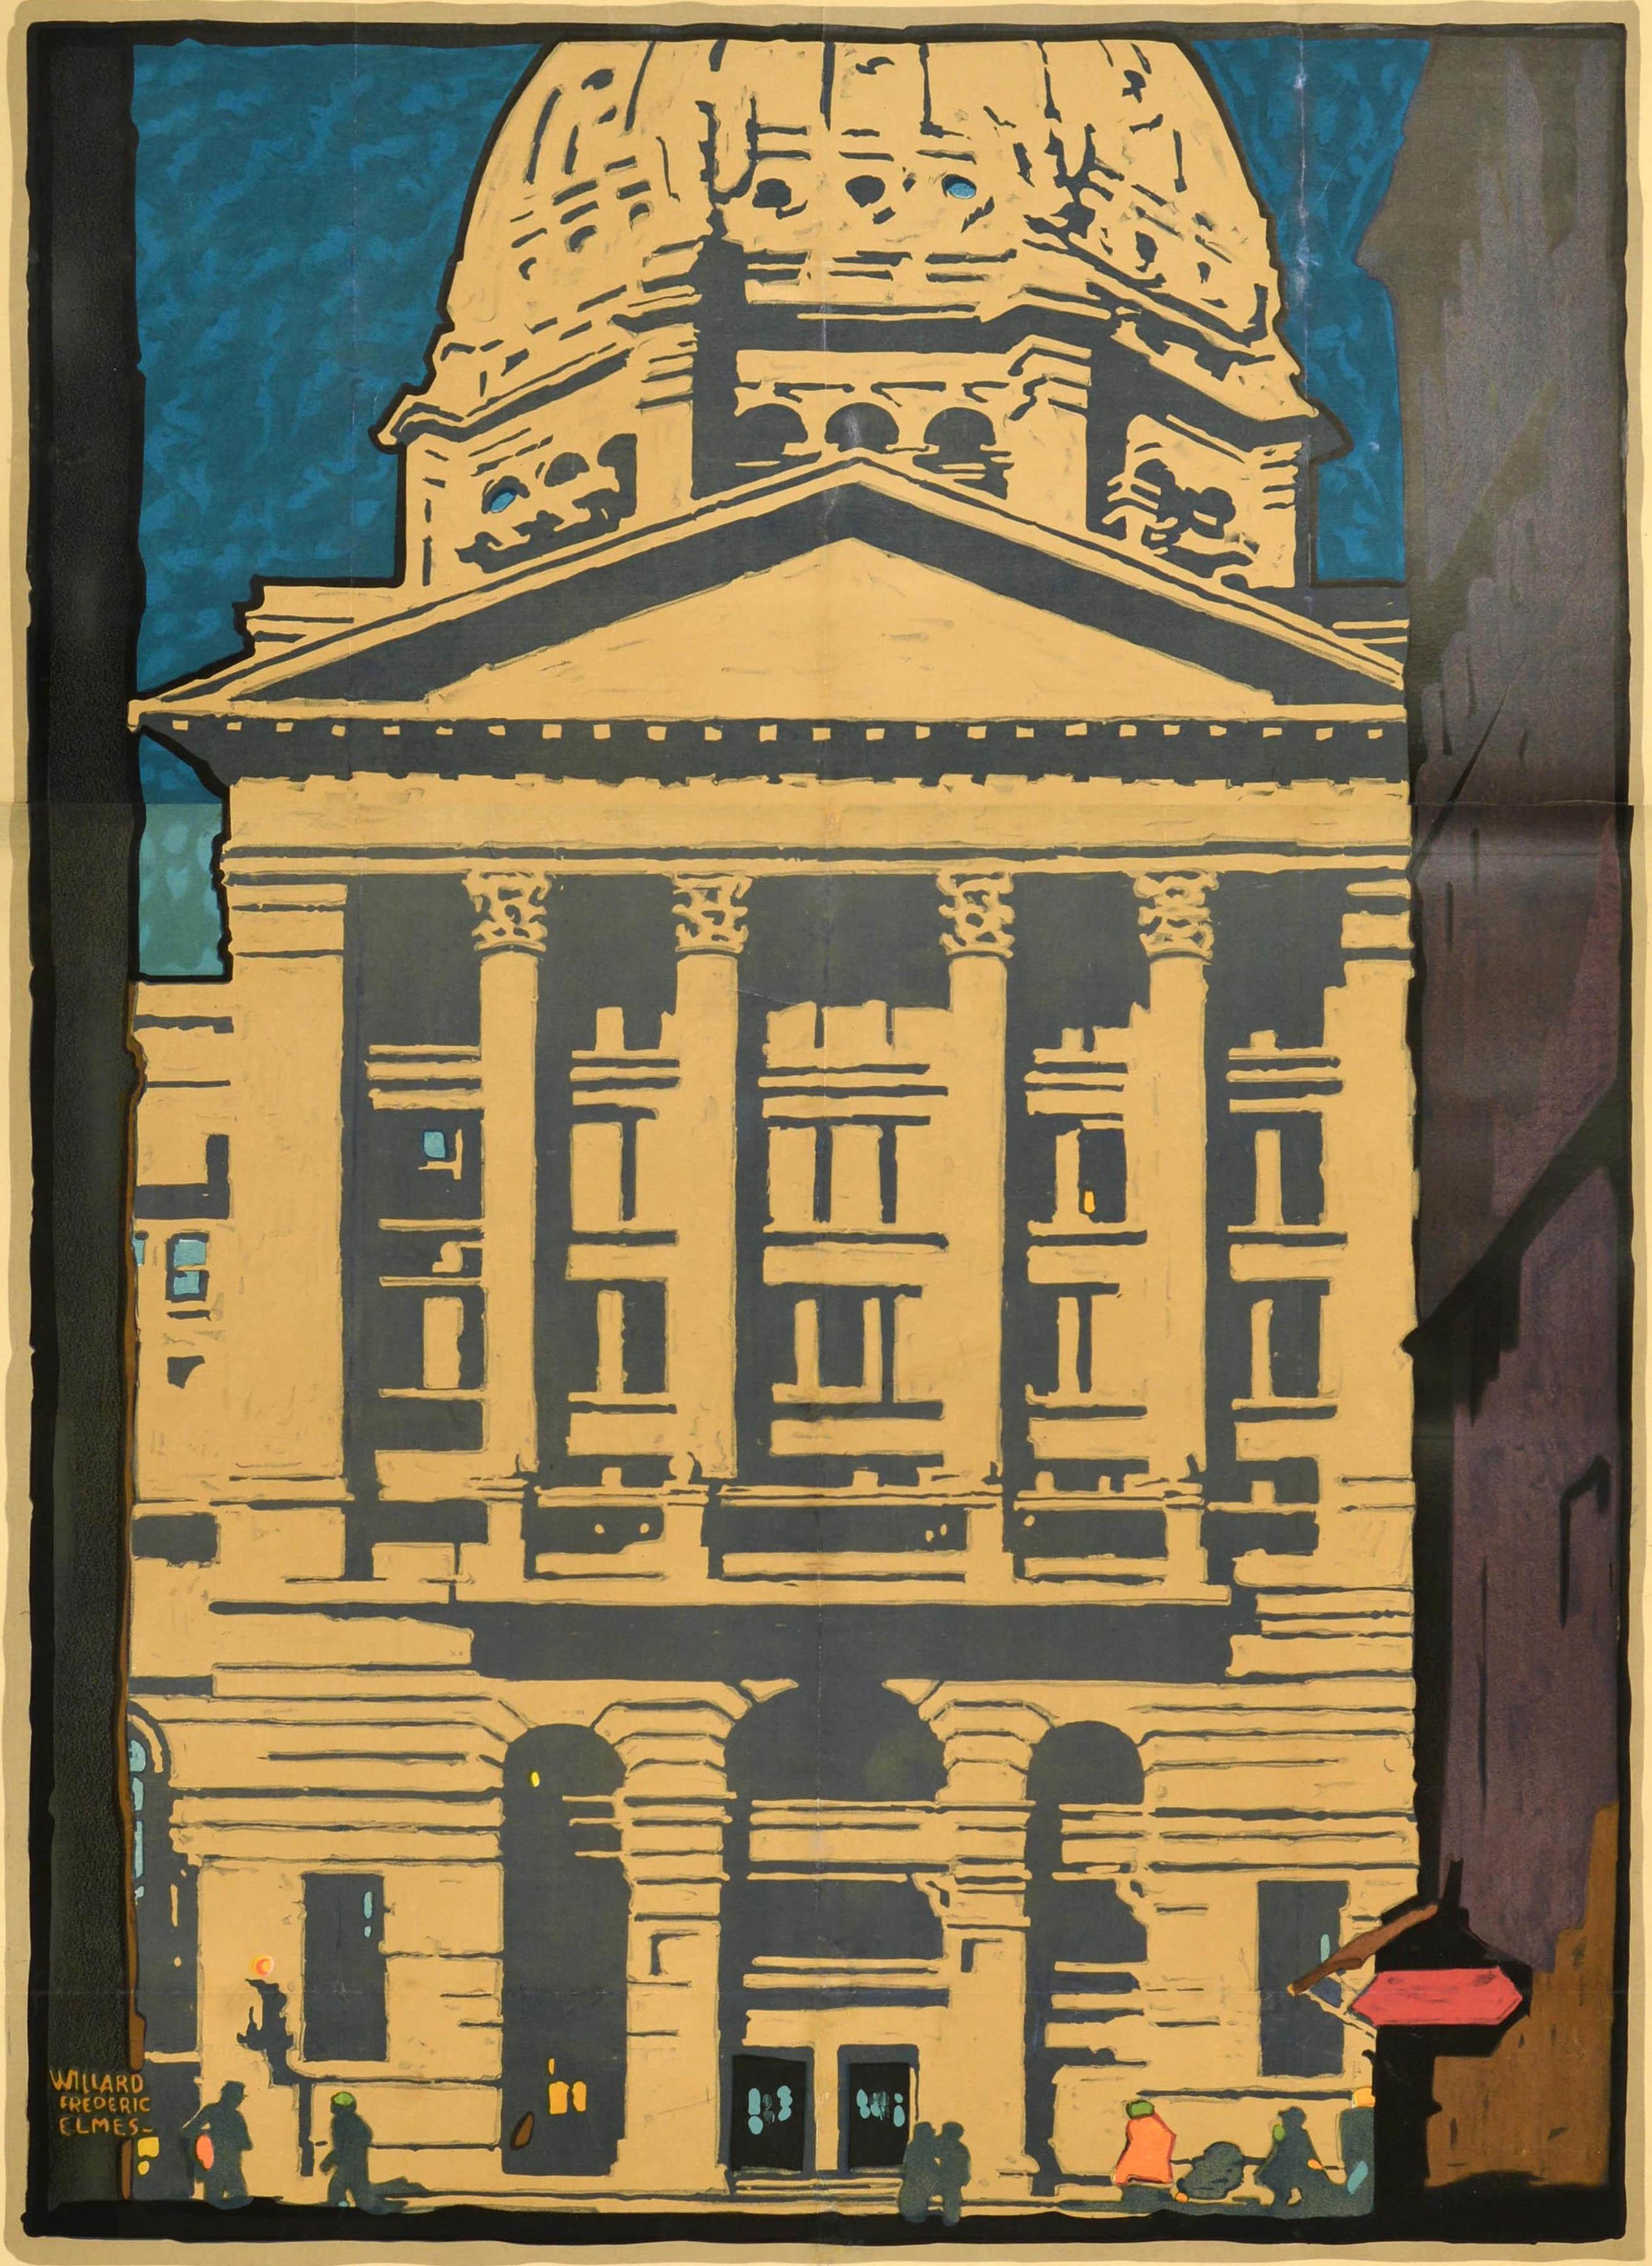 Original vintage travel poster - Federal Building by the Chicago Rapid Transit - featuring great artwork by Willard Frederick Elms (1900-1956) depicting silhouettes of people walking in front of the Beaux-Arts style architecture building with the